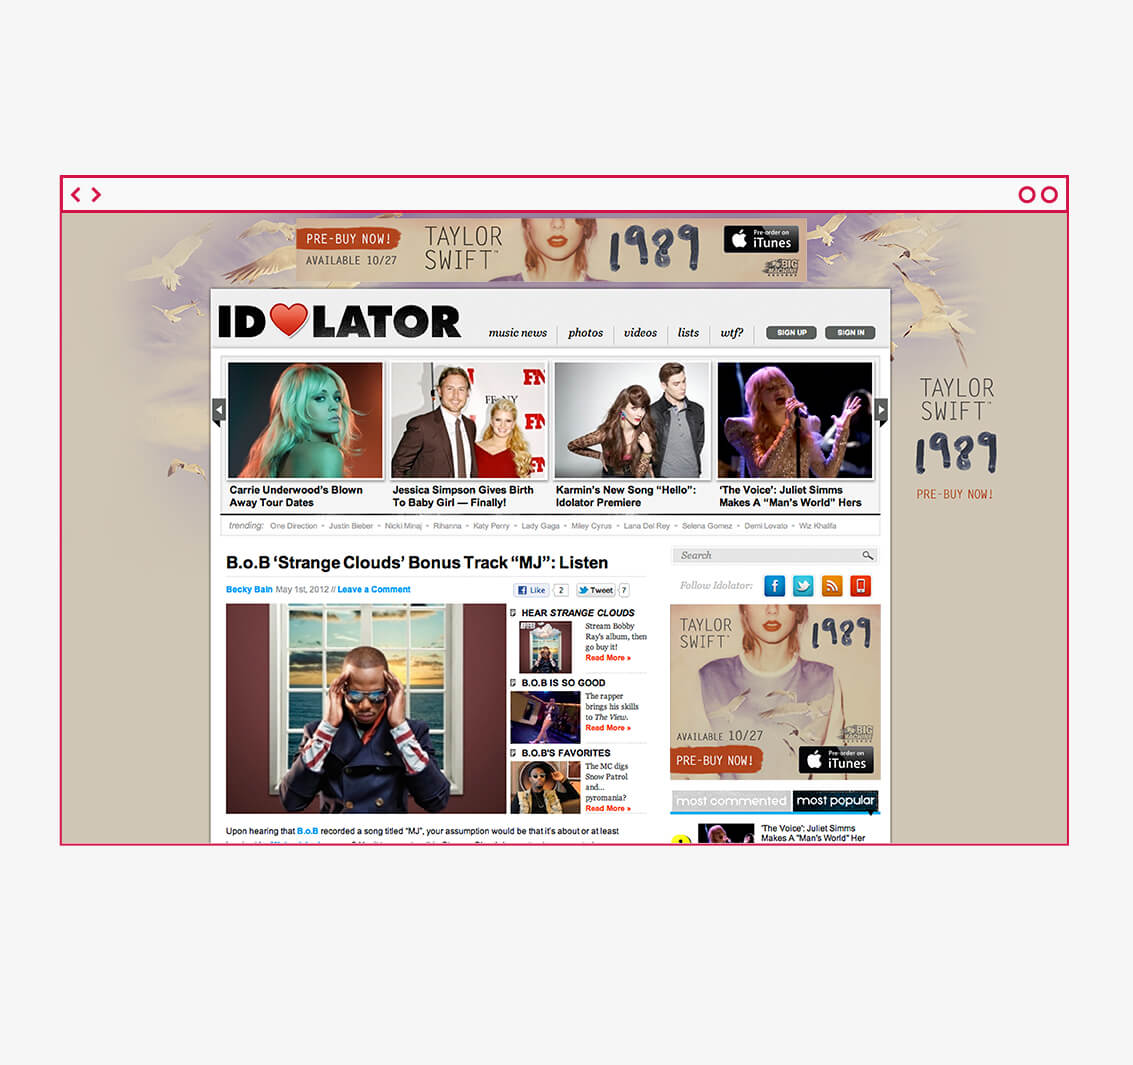 Digital marketing website takeover banners for Taylor Swift 1989 album